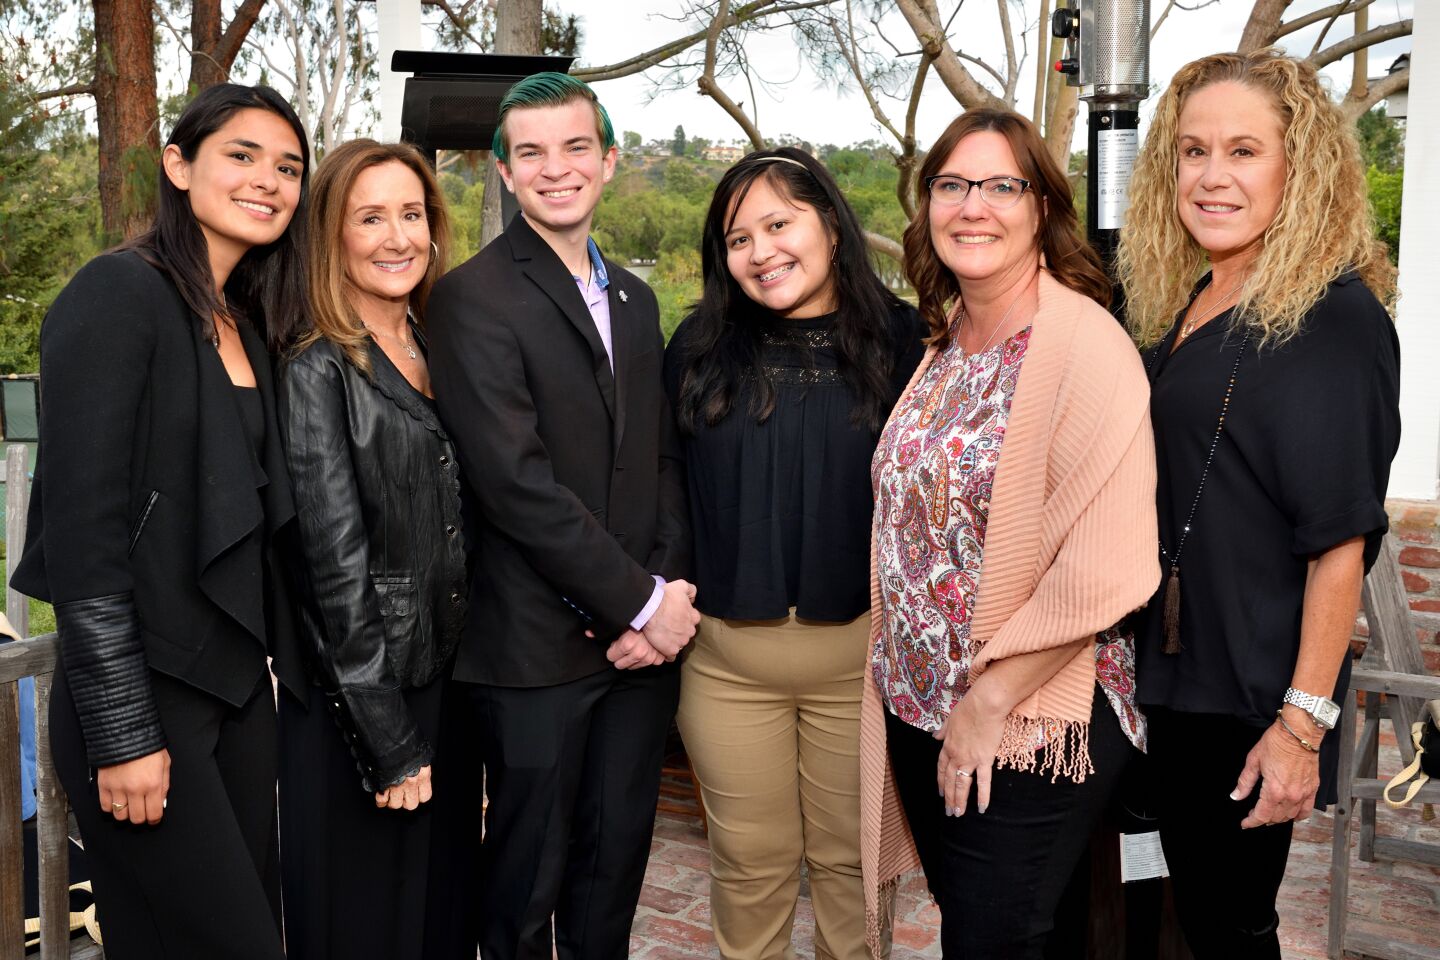 Esperanza Tapia (JIT participant), Laura Maio (Molly's Angels board member), Dylan Carter (JIT investor outreach coordinator), Alleen Escobar (JIT participant), Candi Newton (Molly's Angels board member), Sheila Belinsky (Molly's Angels CEO)